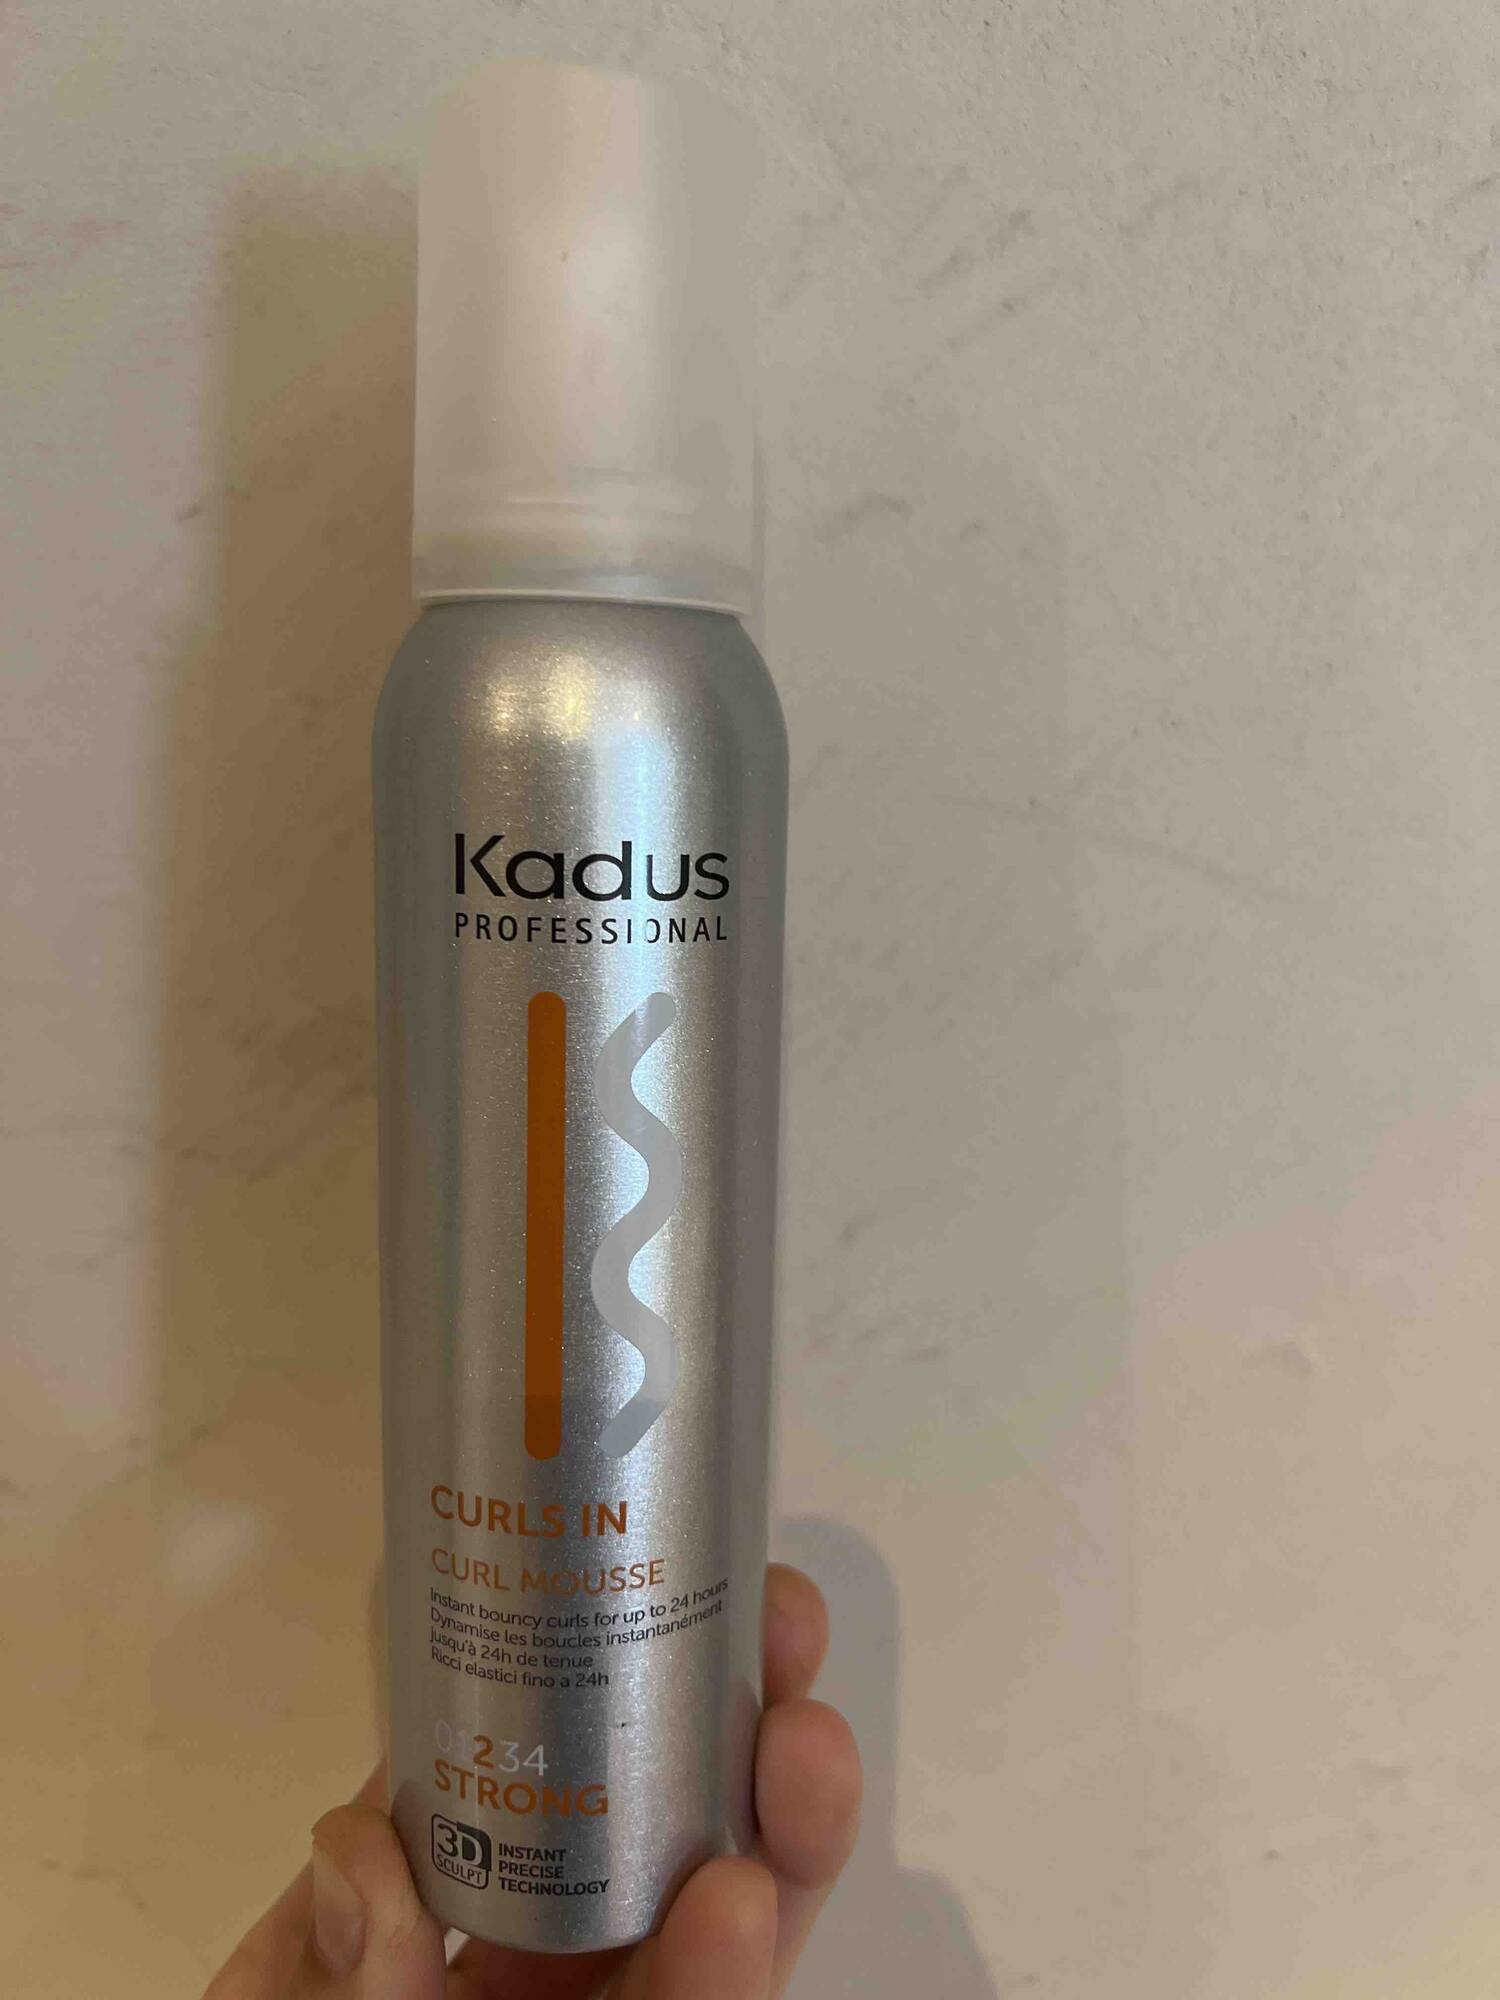 KADUS - Curls in - Curl mousse 2 strong